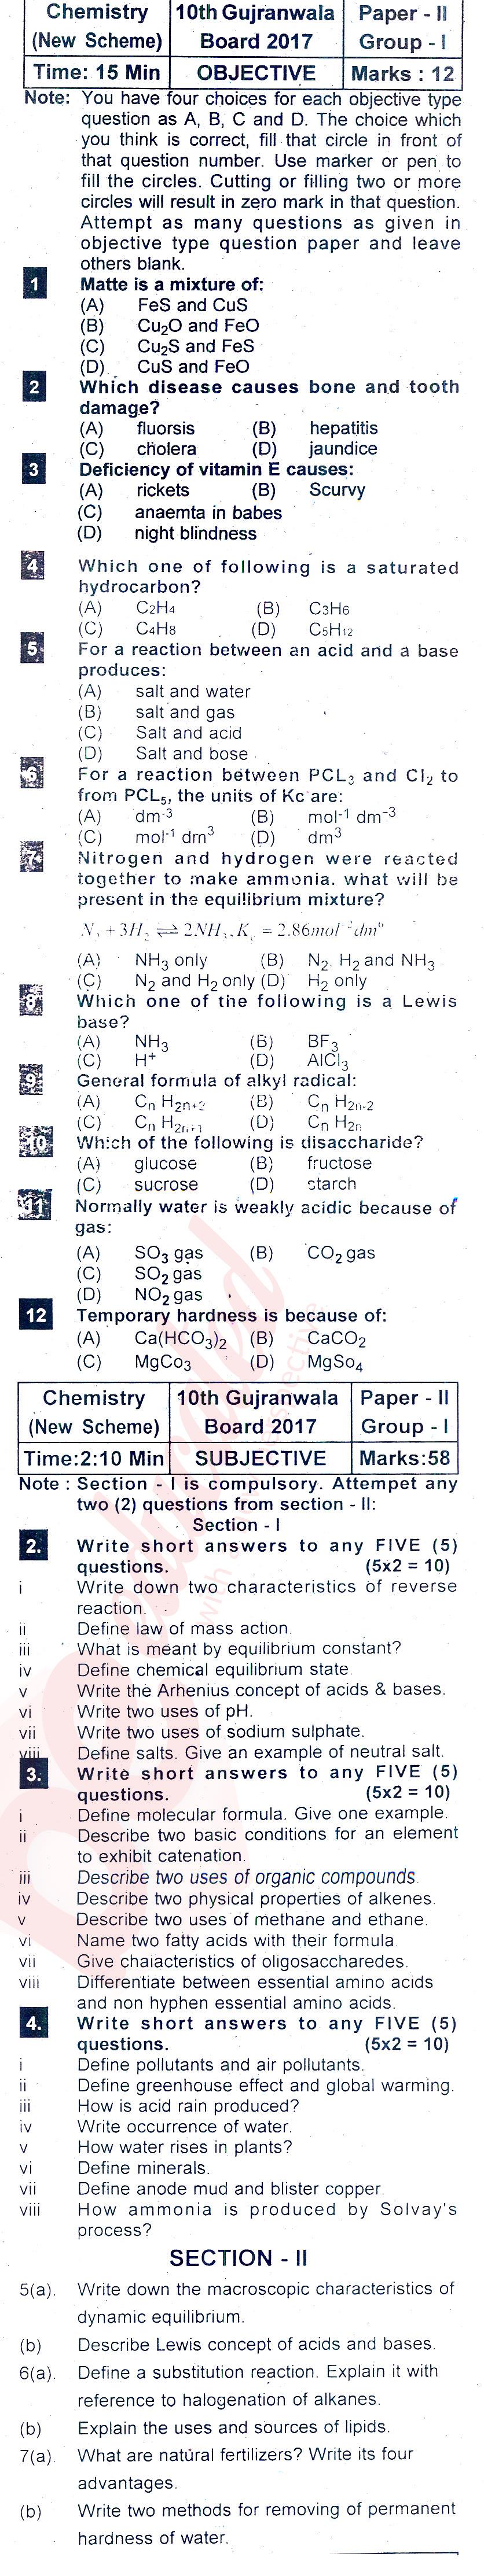 Chemistry 10th class Past Paper Group 1 BISE Gujranwala 2017